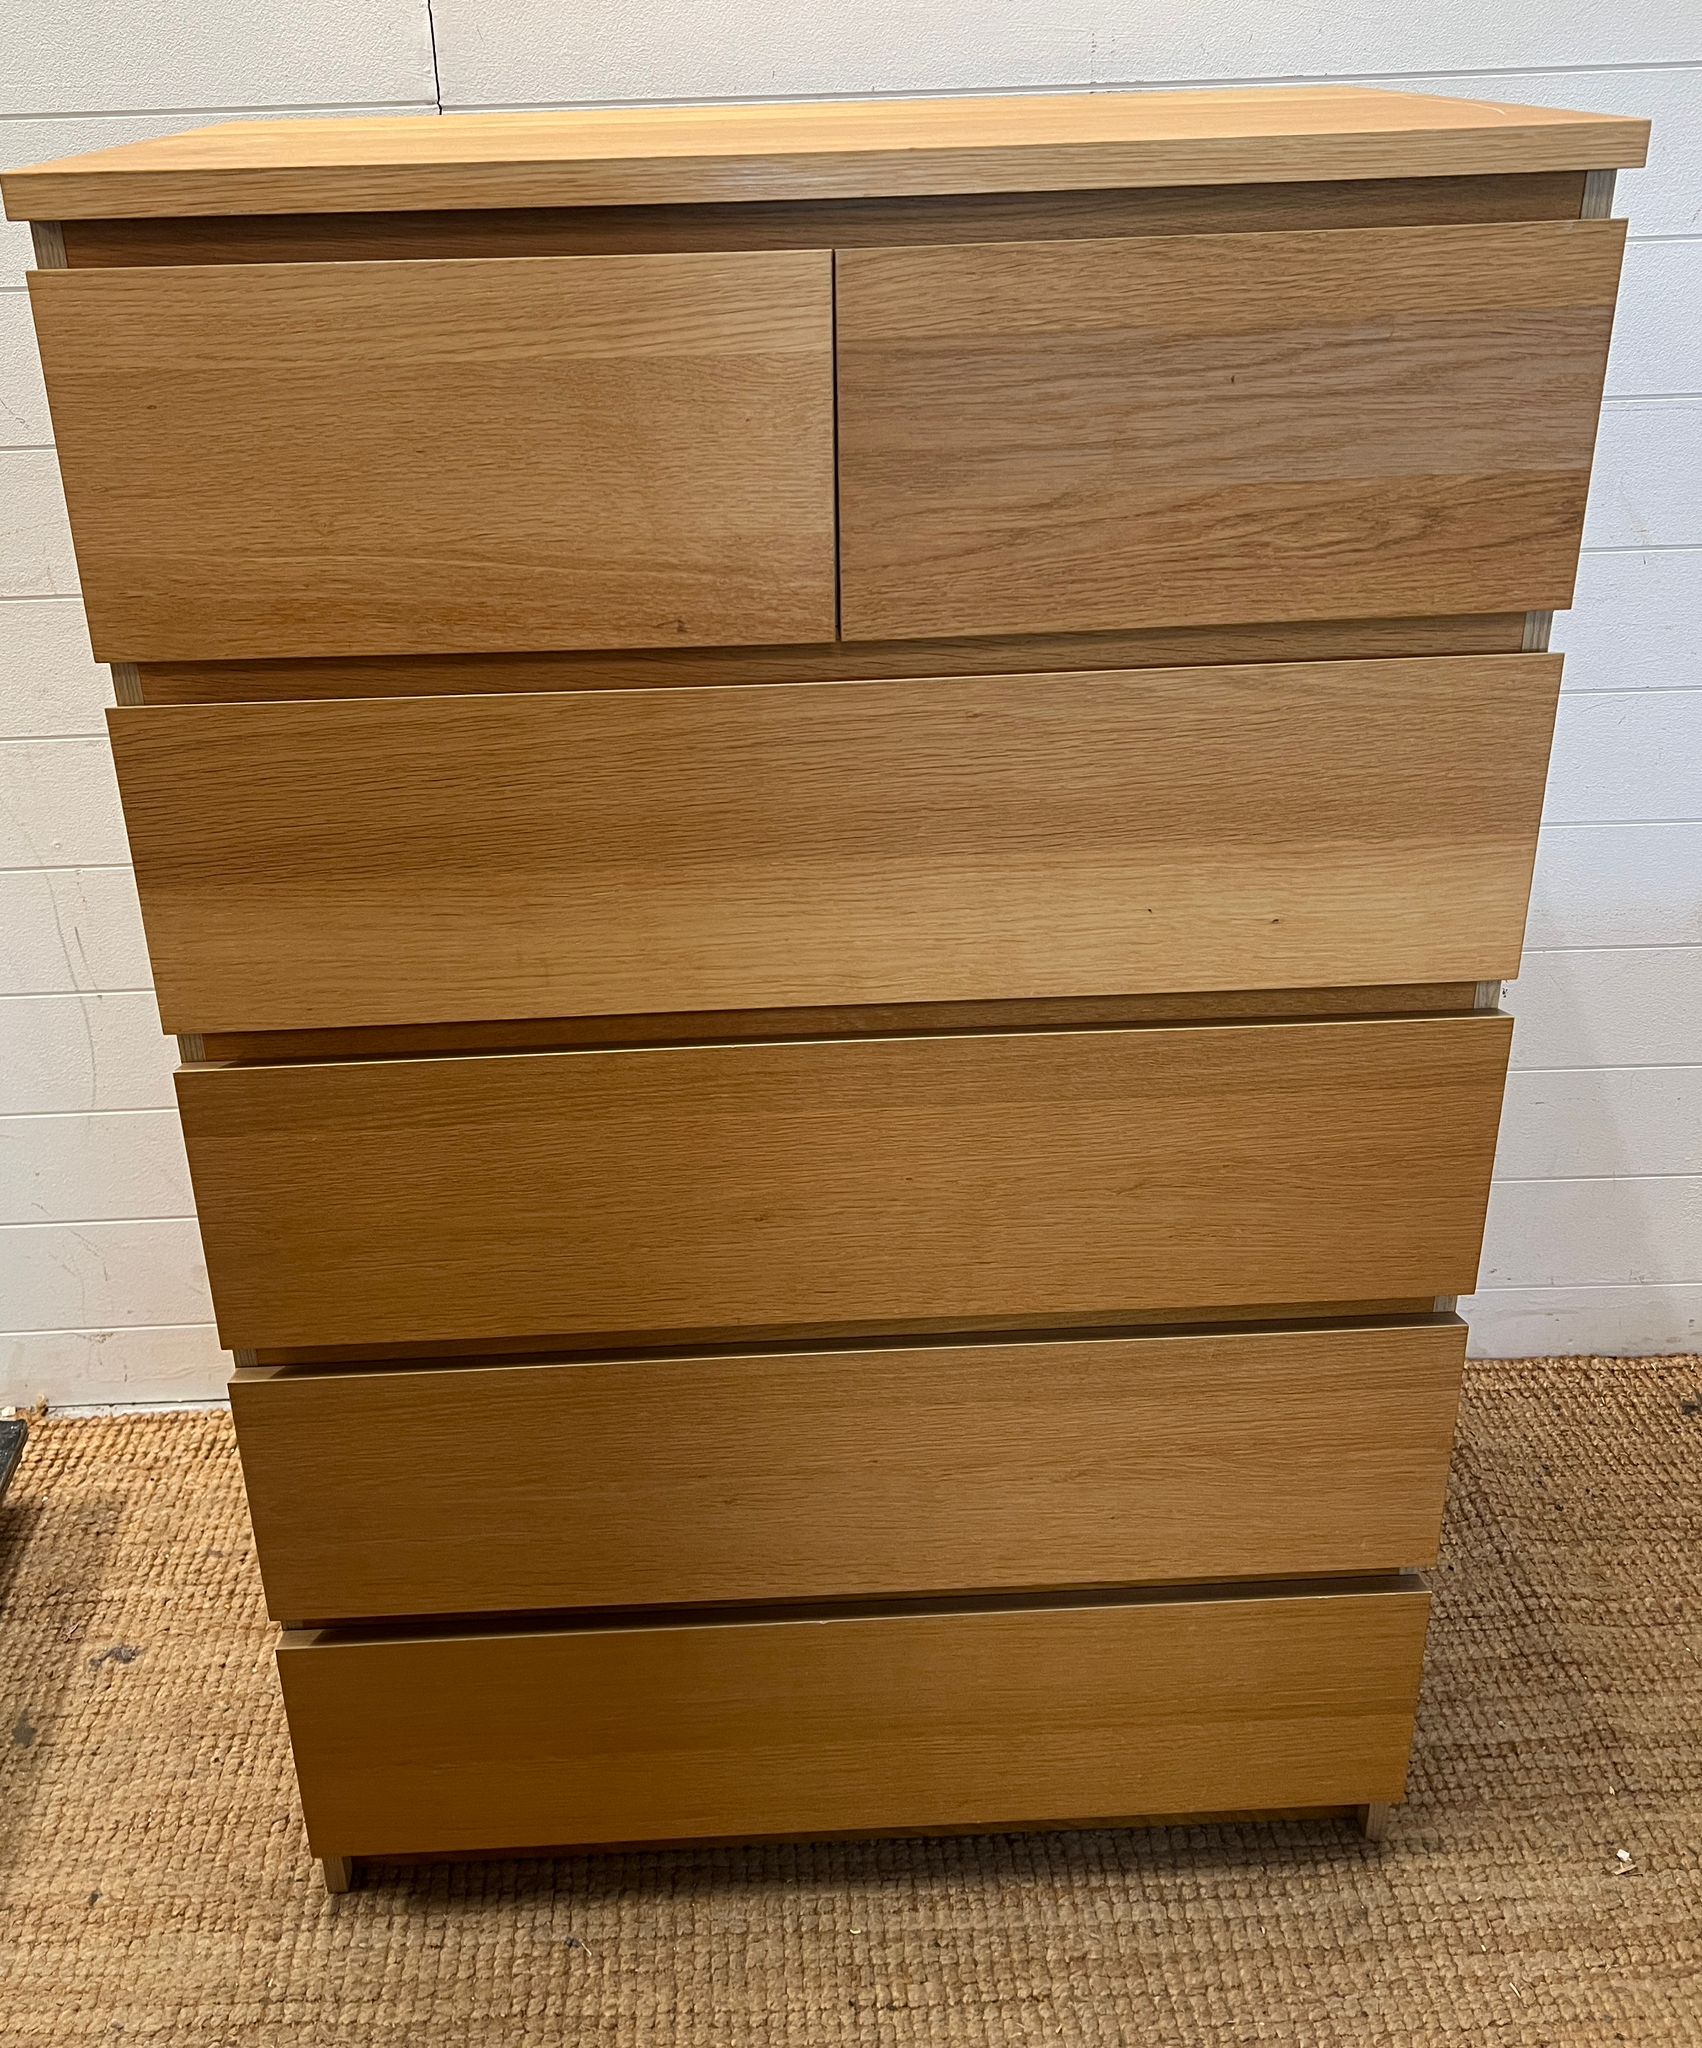 An Ikea Malm chest of drawers, four long and two short drawers (H123cm W80cm D48cm)